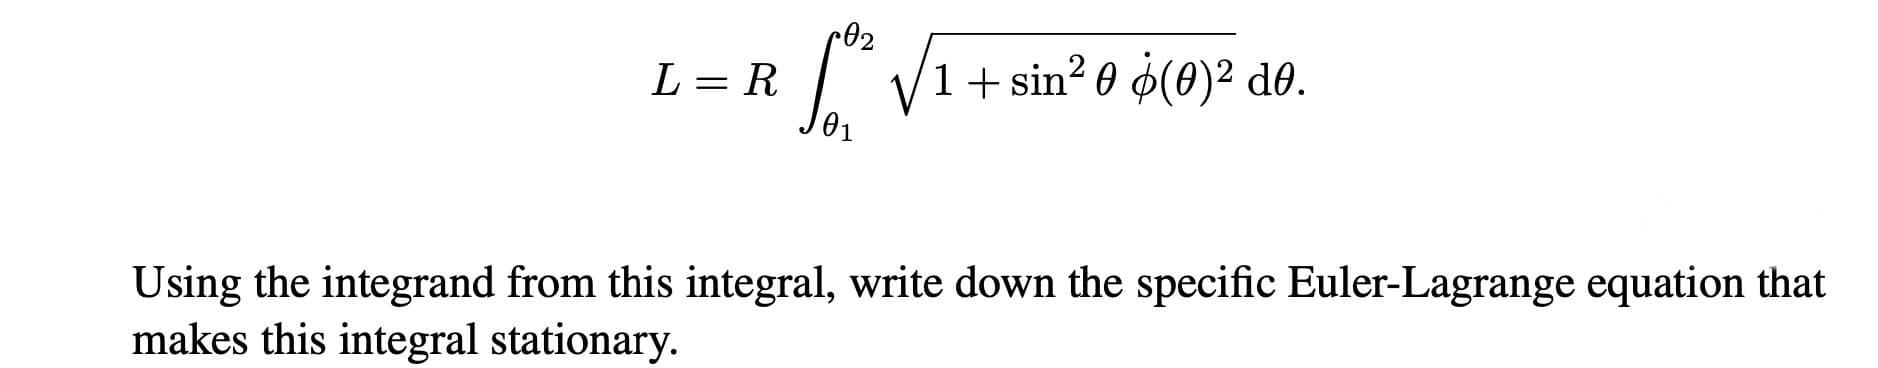 сө2
1+ sin? 0 ø(0)² d0.
L = R
Using the integrand from this integral, write down the specific Euler-Lagrange equation that
makes this integral stationary.
